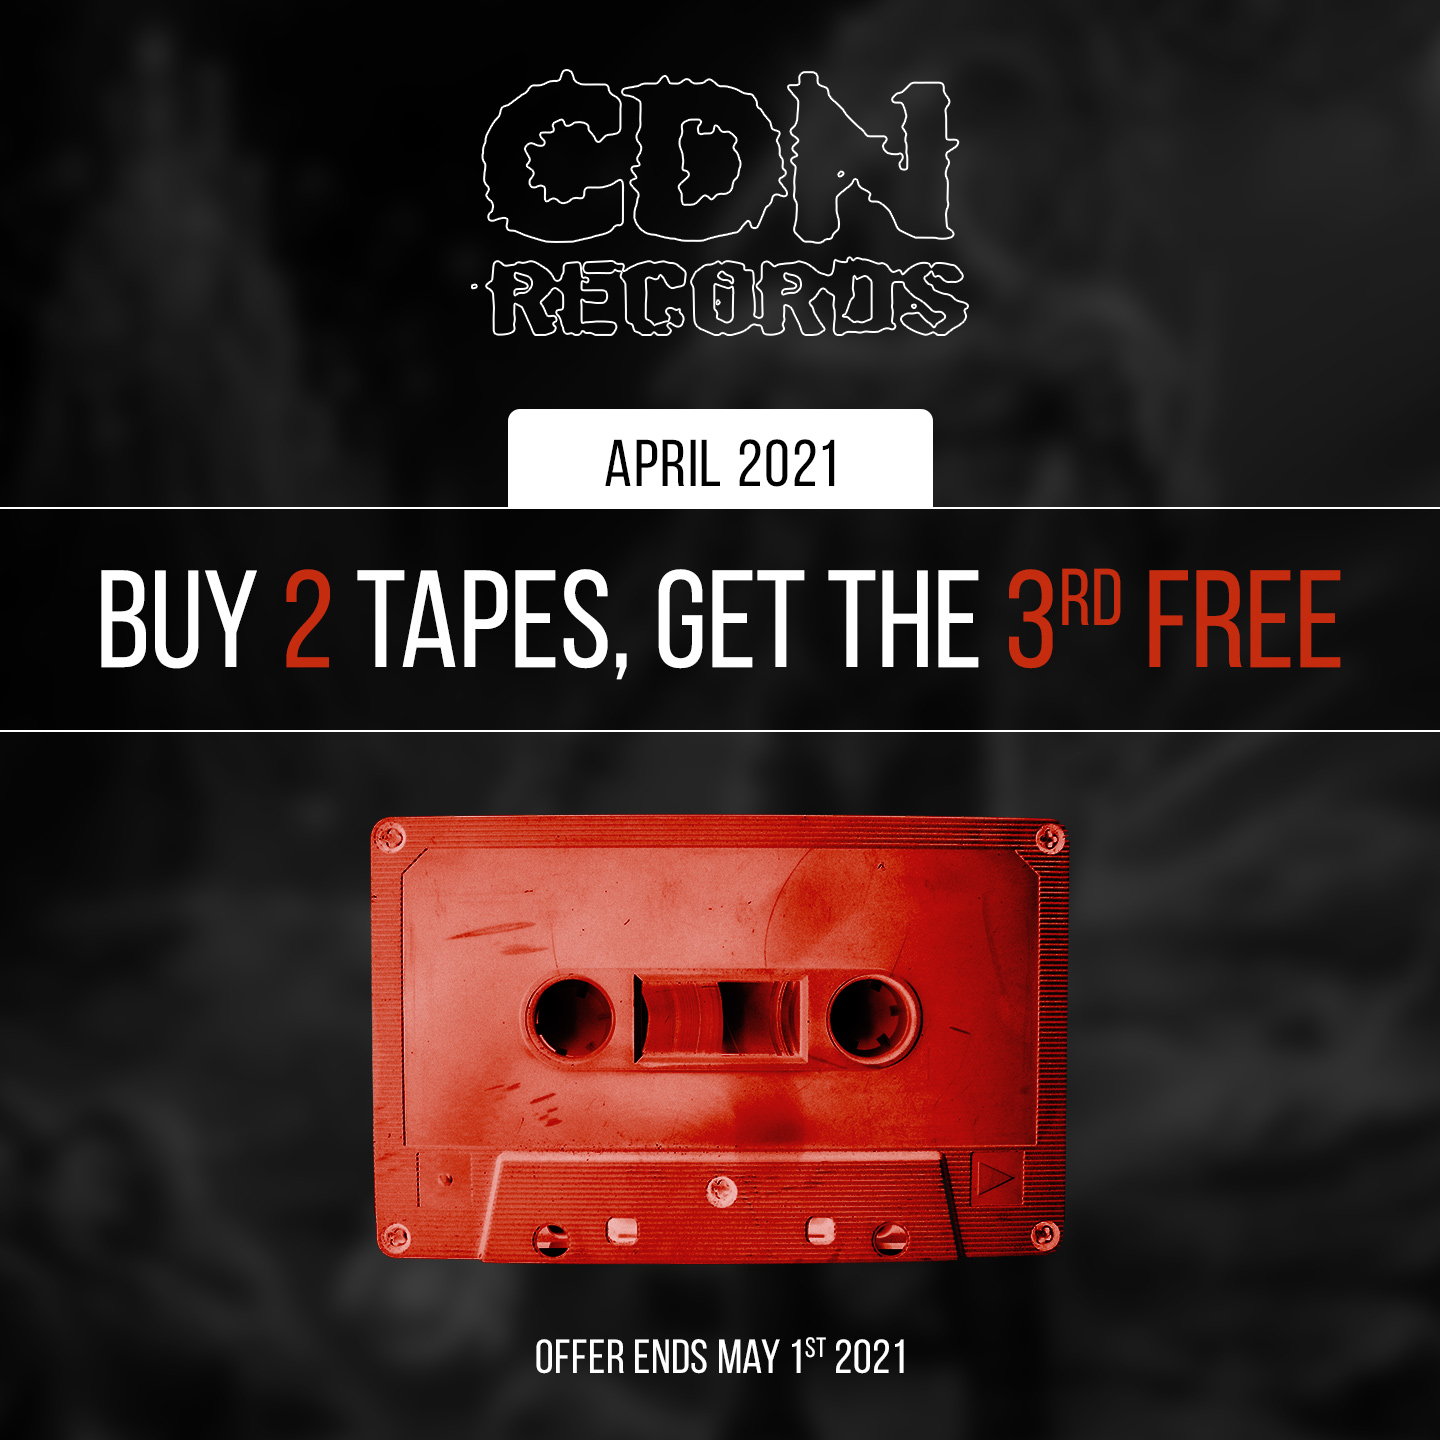 promo graphic for tapes offer